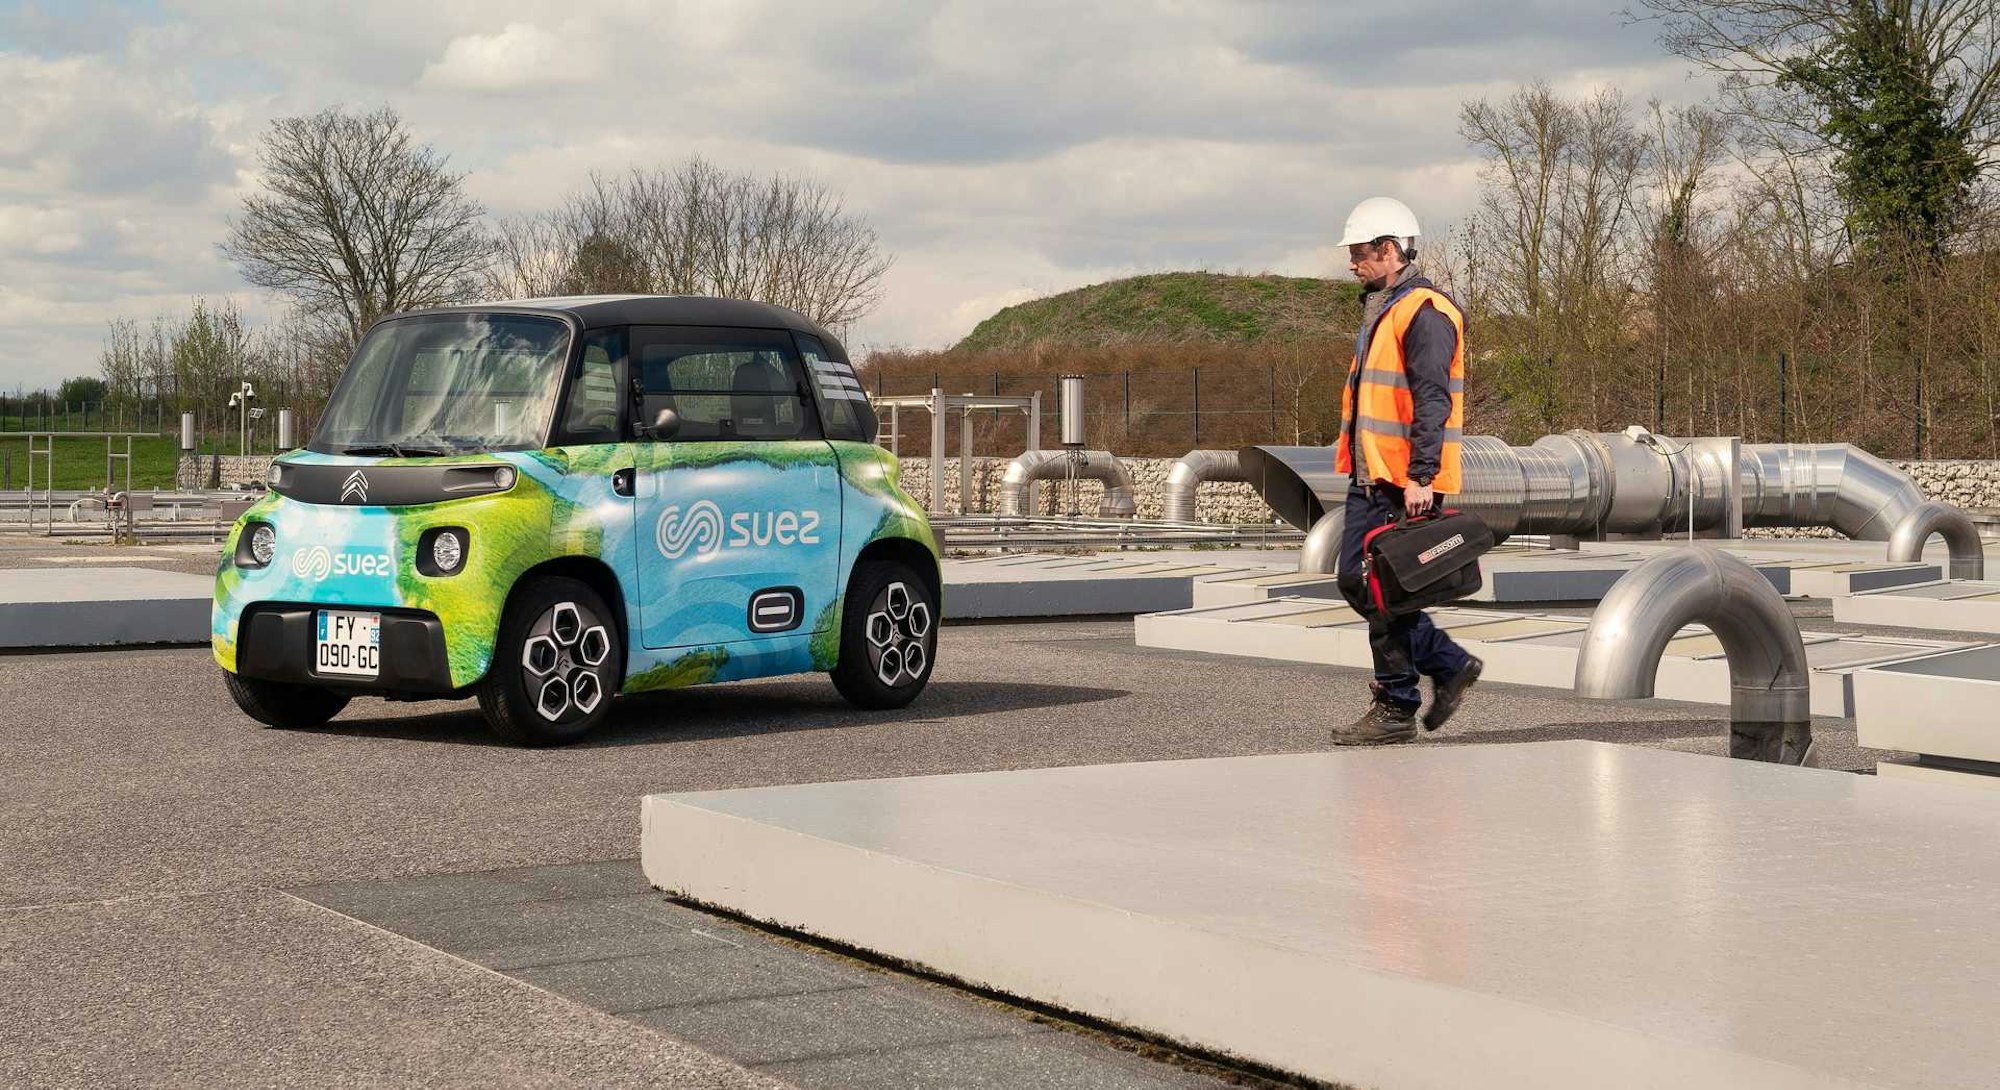 Citroën has unveiled a cargo-ready version of its small AMI electric car.